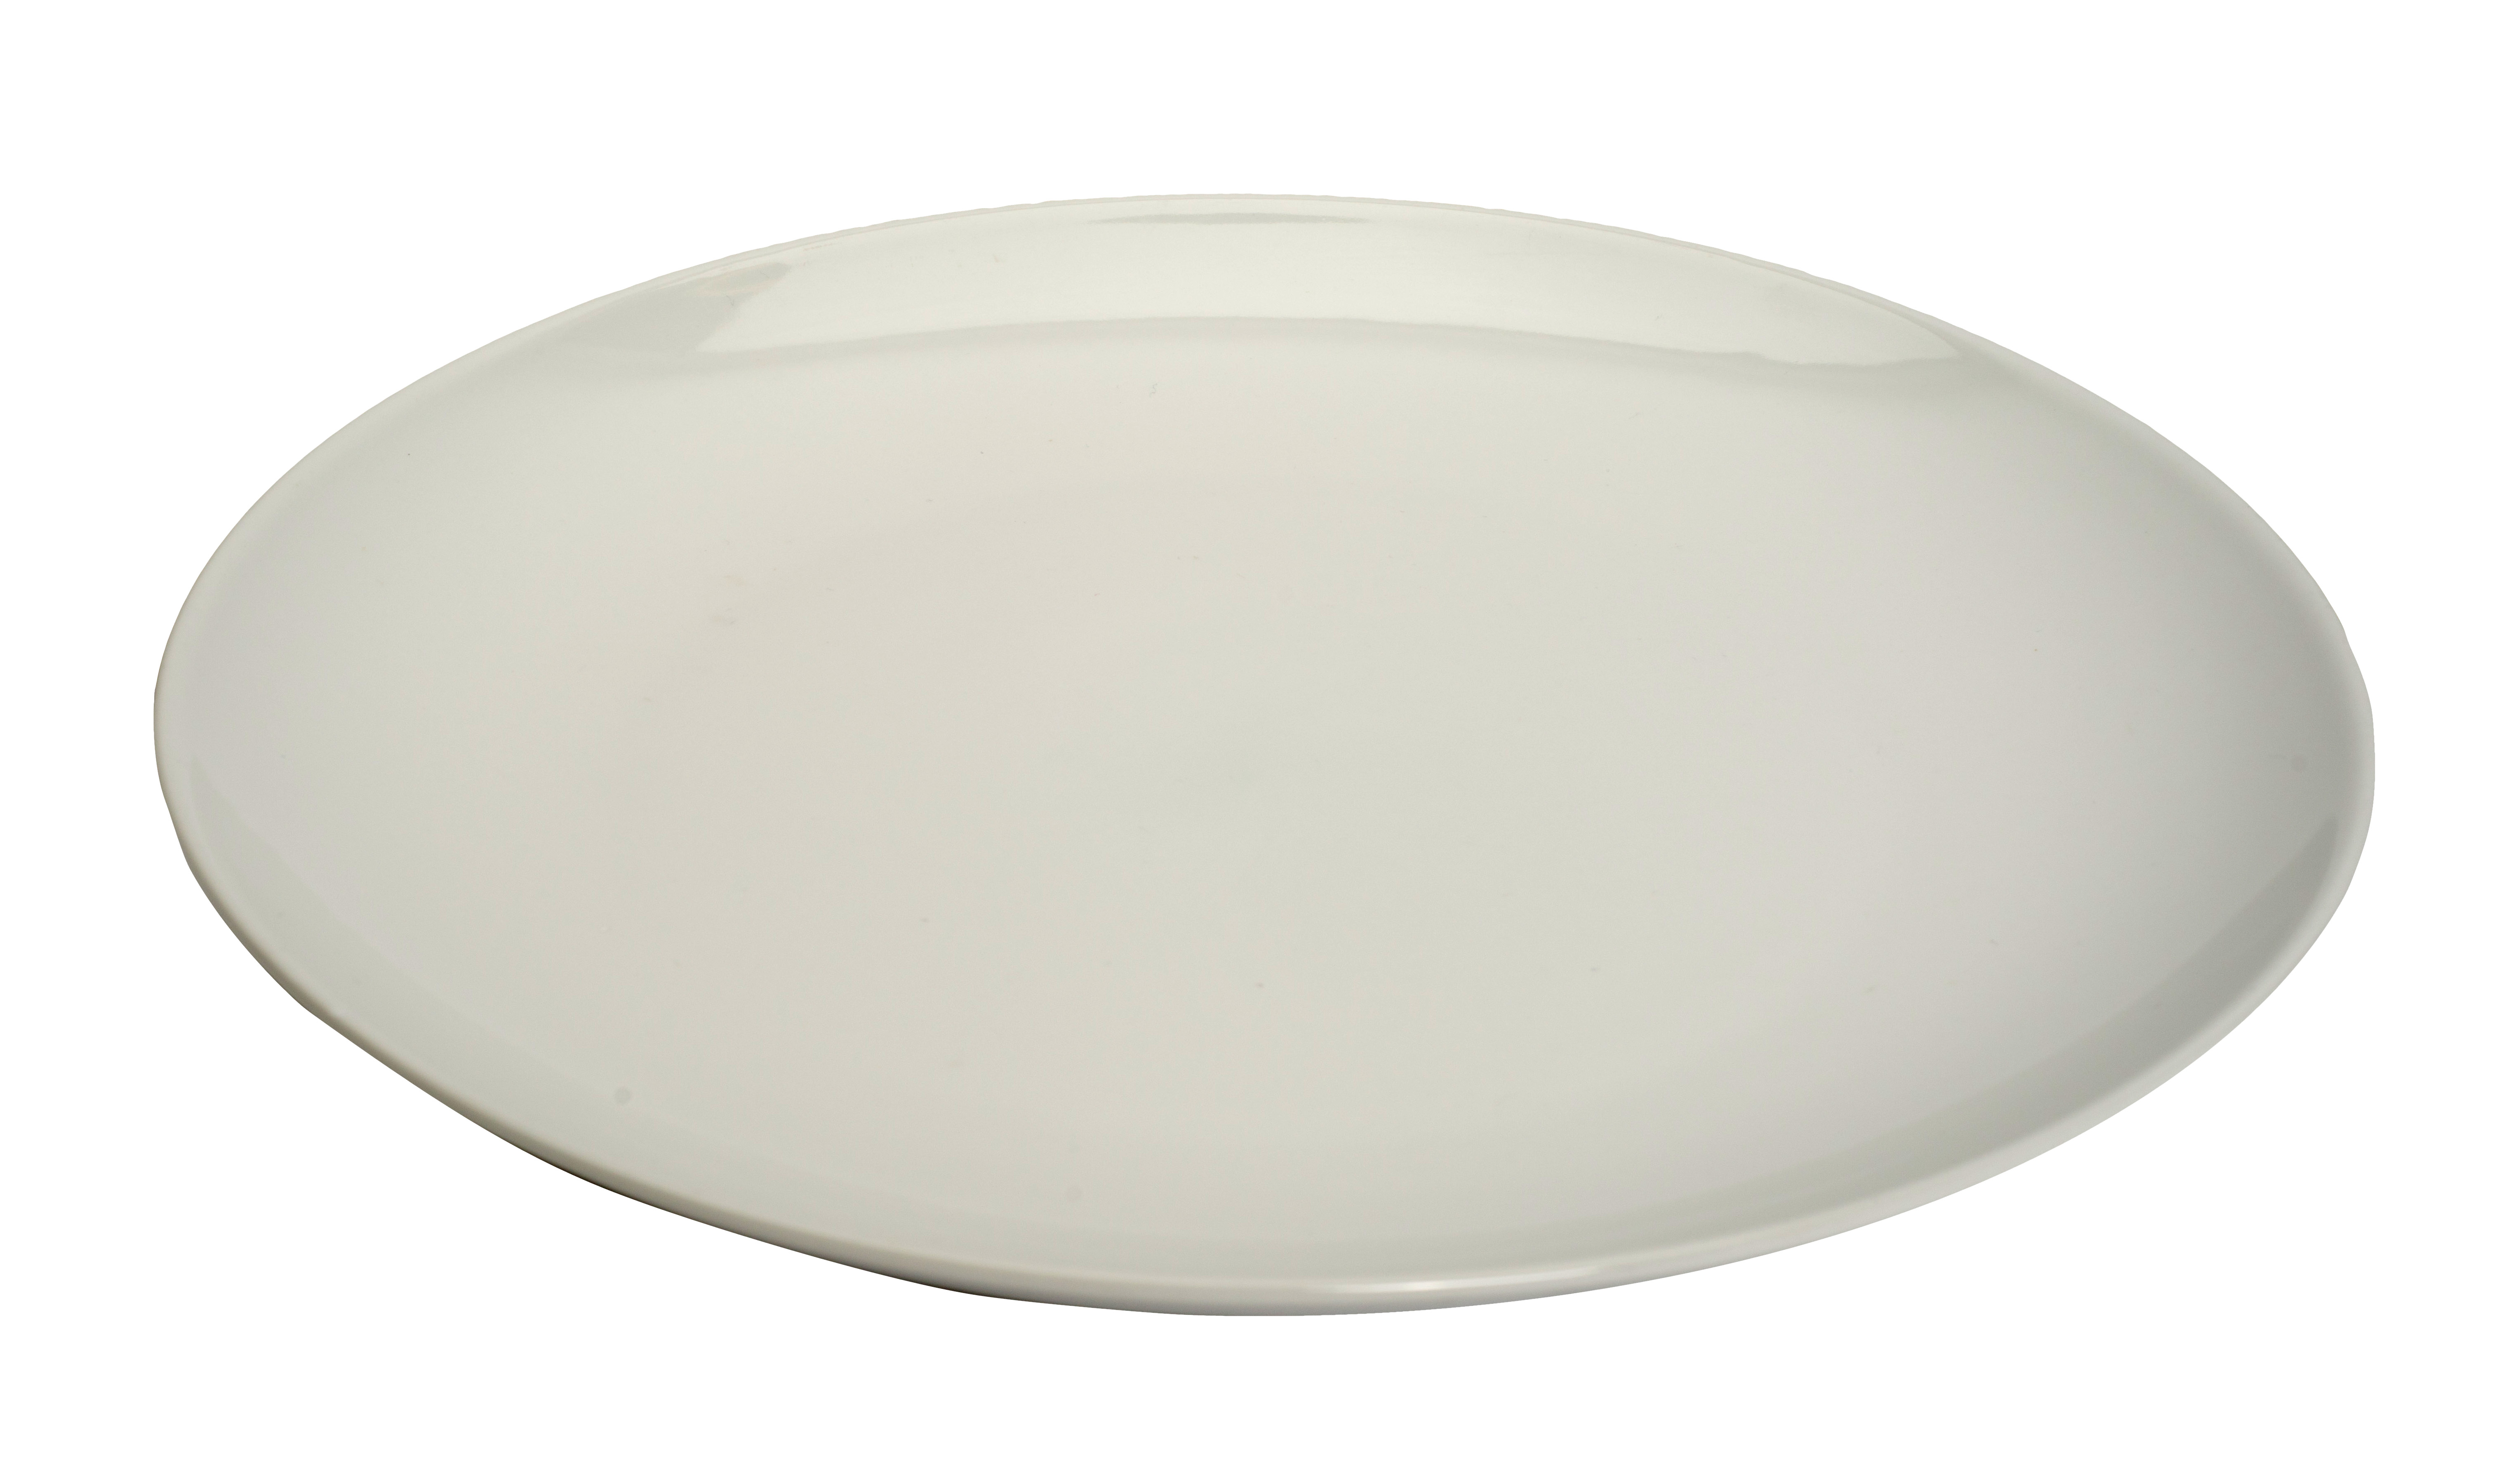 category_D1017 - Coupe Platter 14